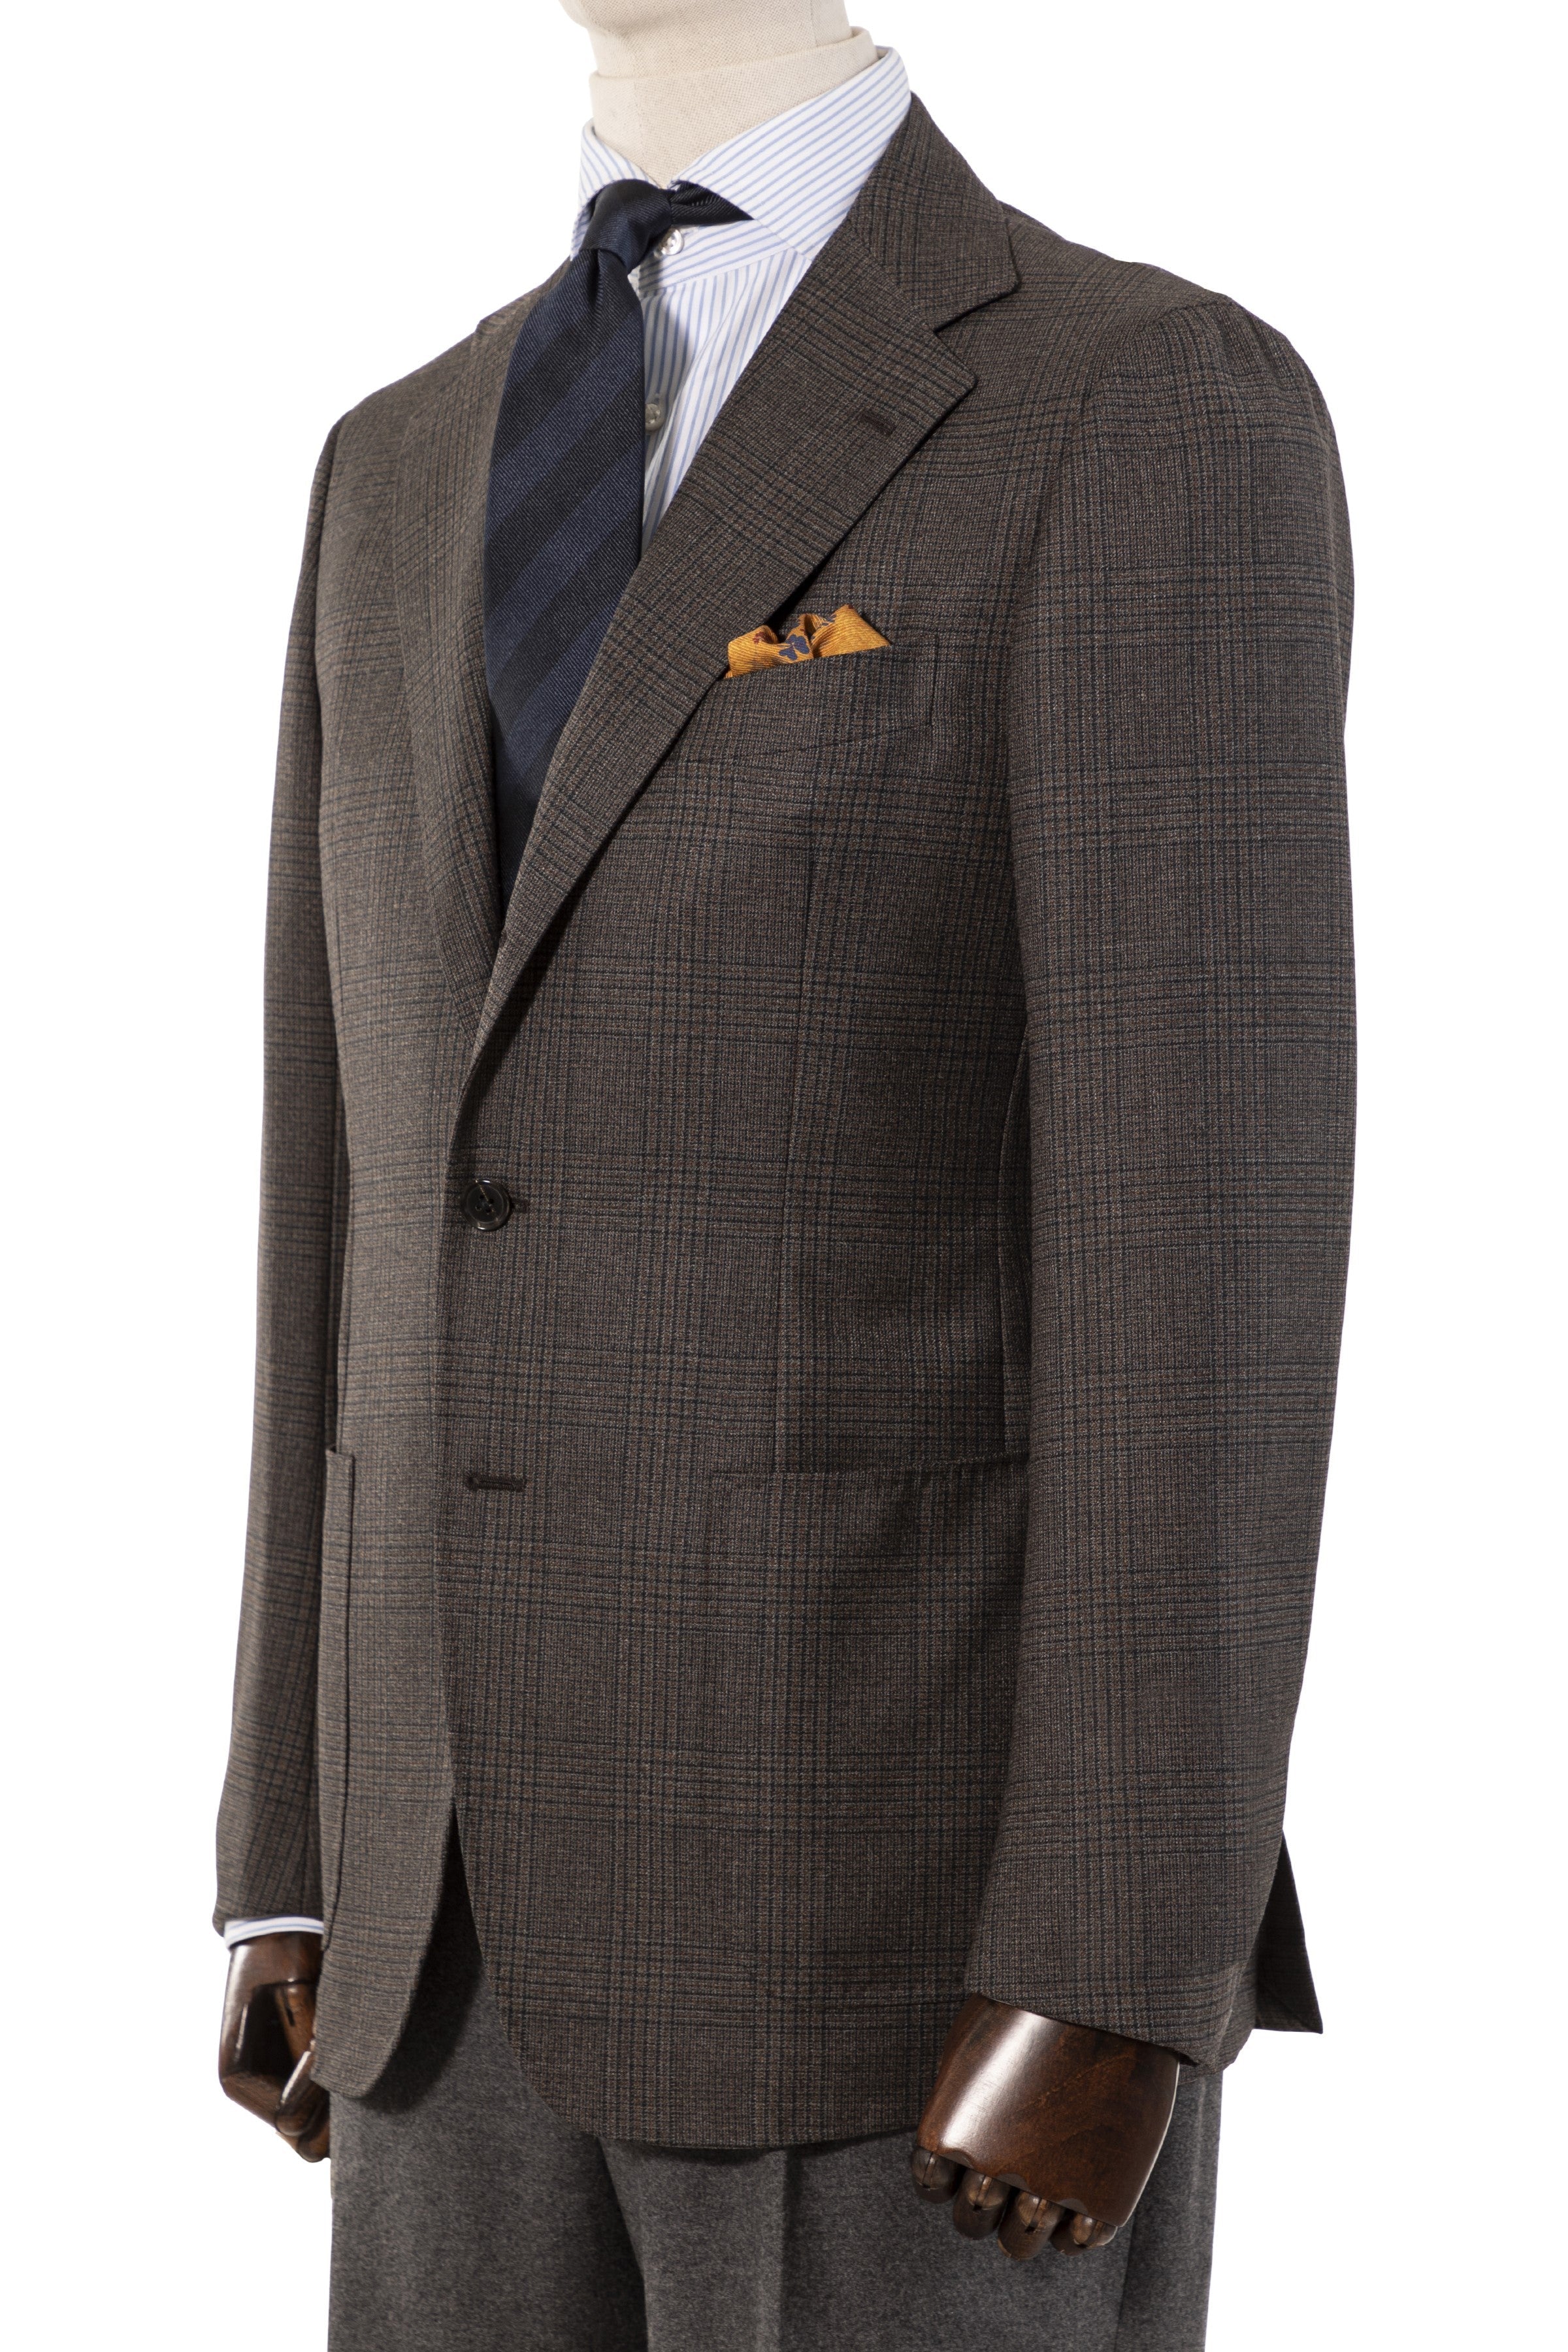 The Armoury by Ring Jacket Model 3 Brown Wool Check Sport Coat